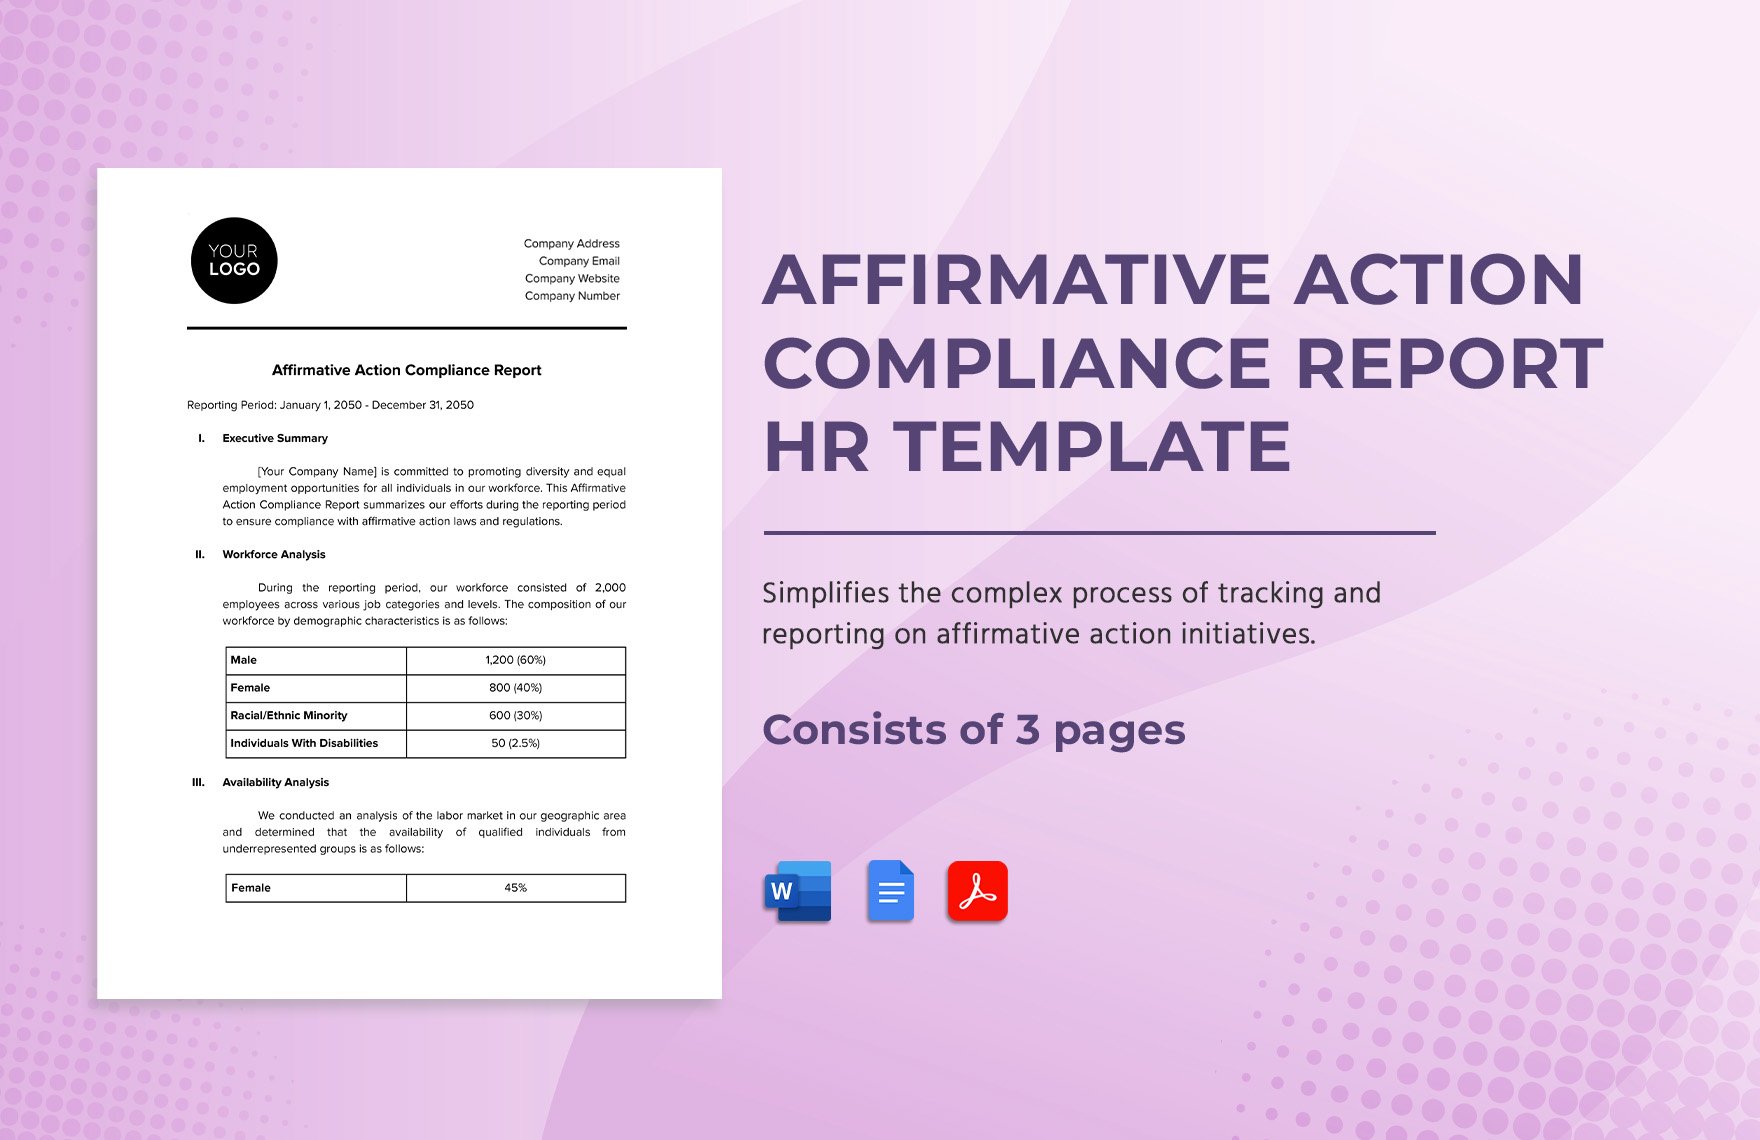 Affirmative Action Compliance Report HR Template